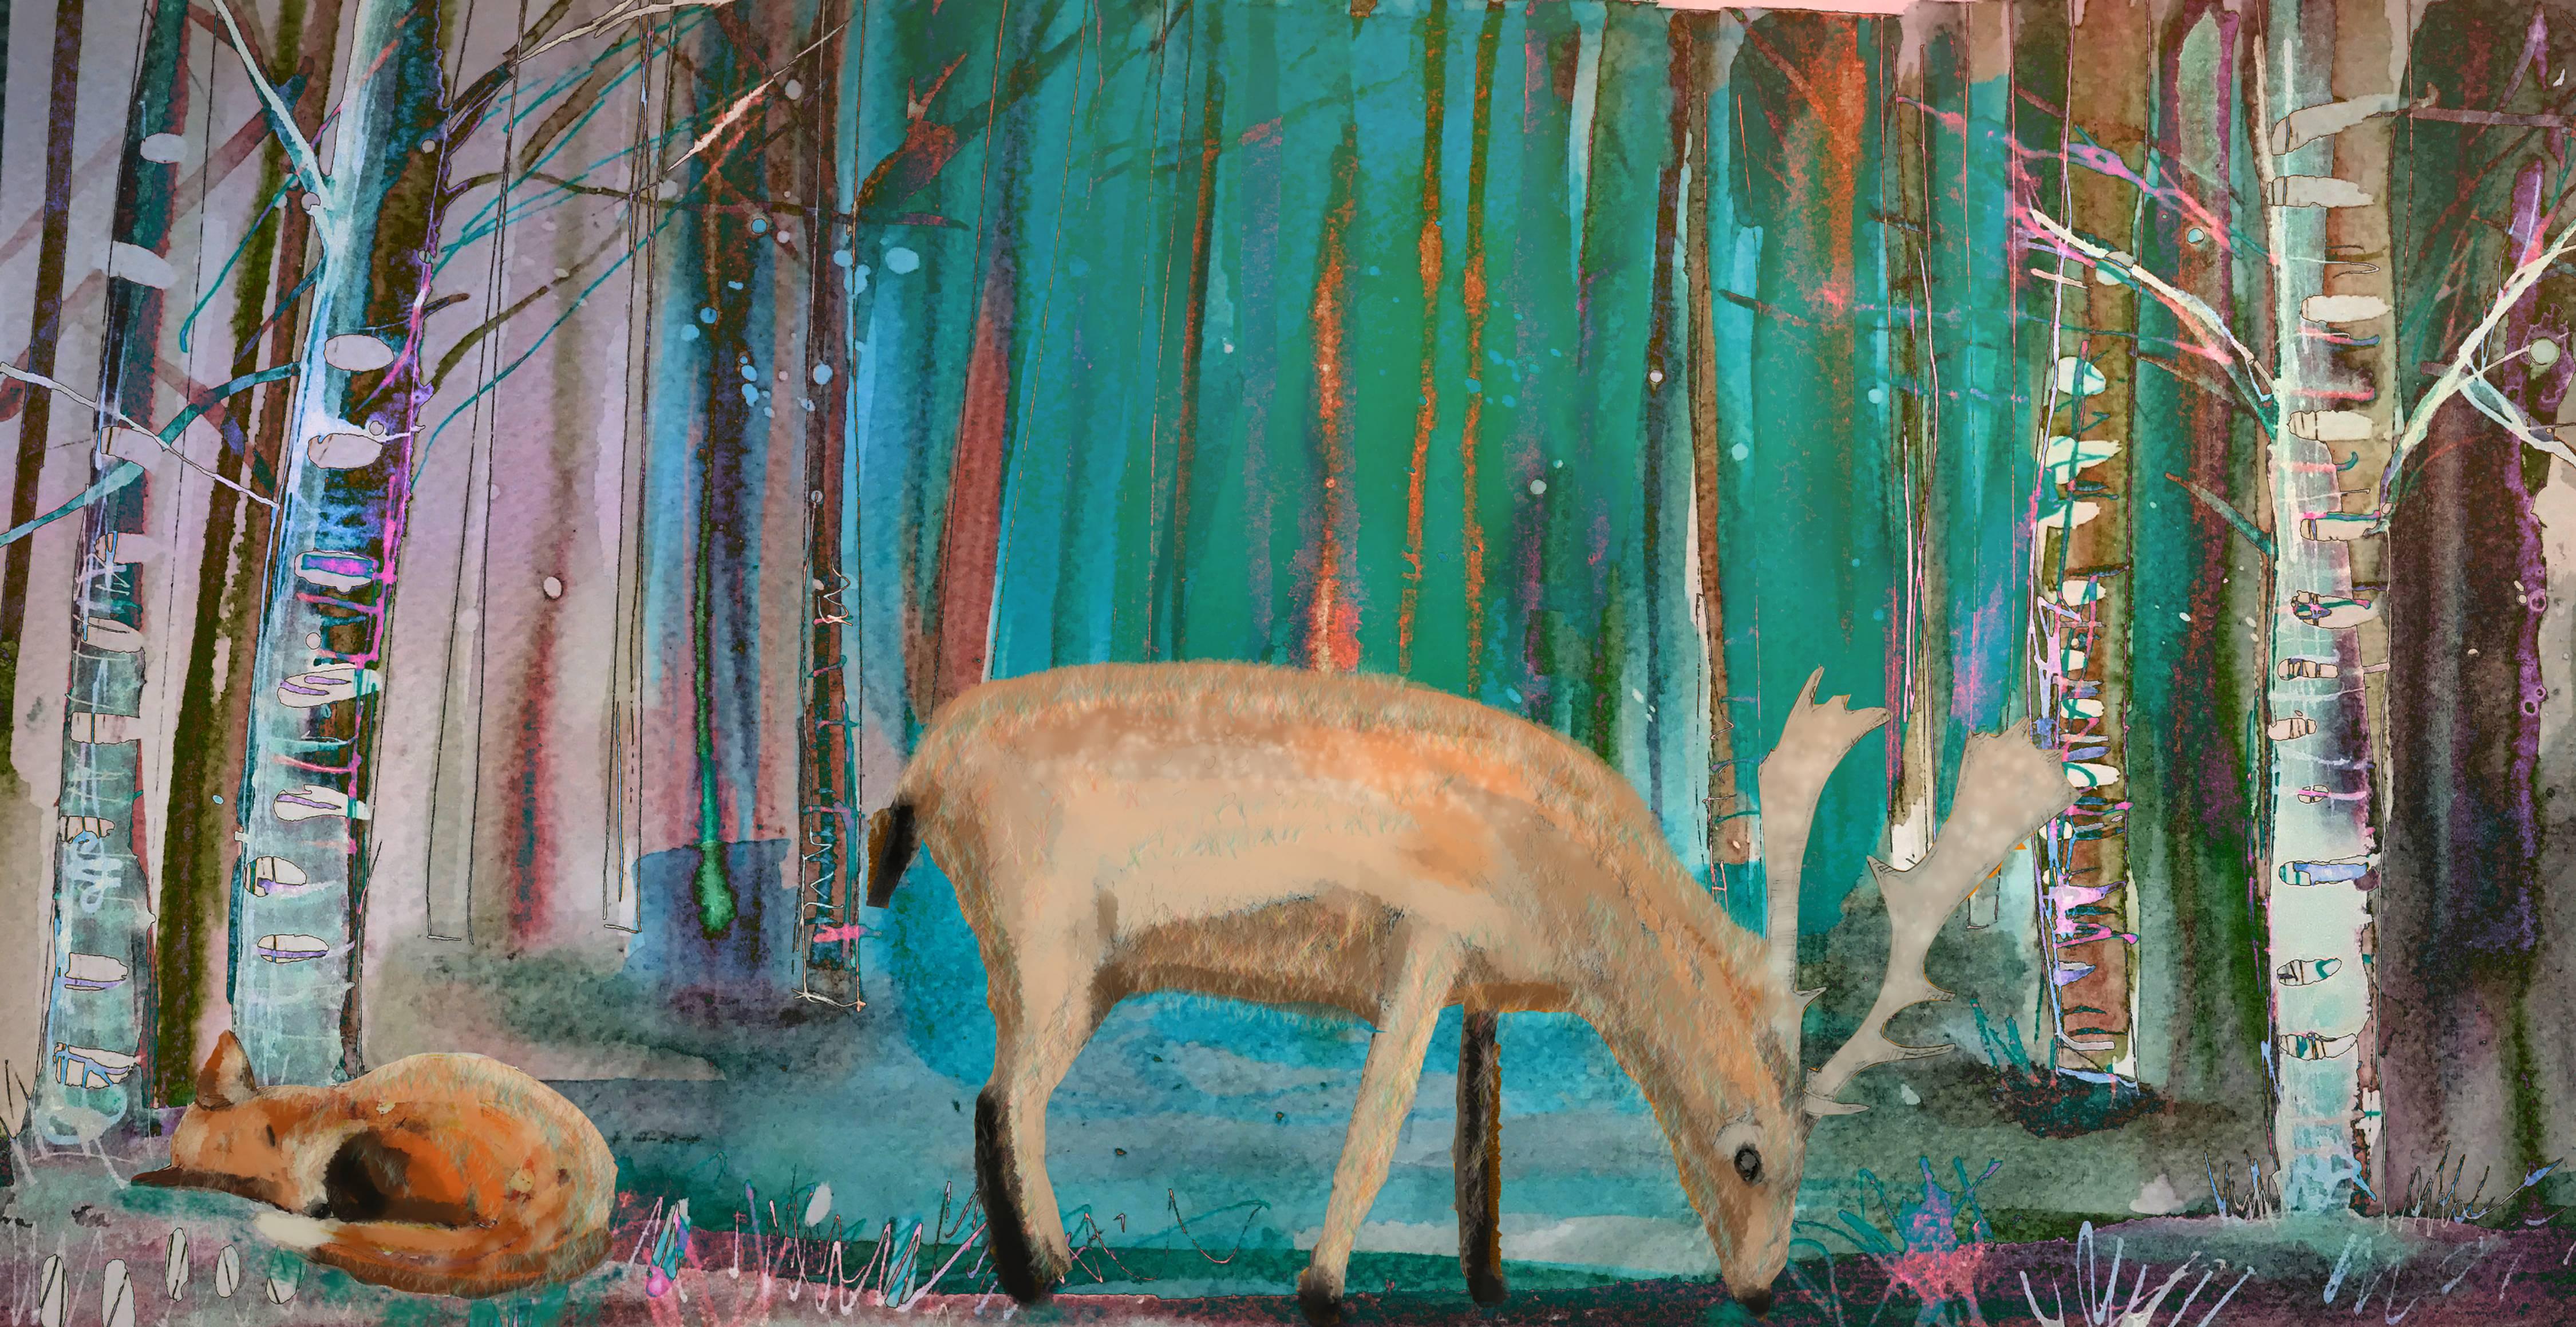 Deer in the Blue Woods, Digital Limited Edition Print of 20. Diamond dust Signed - Art by Claire Westwood